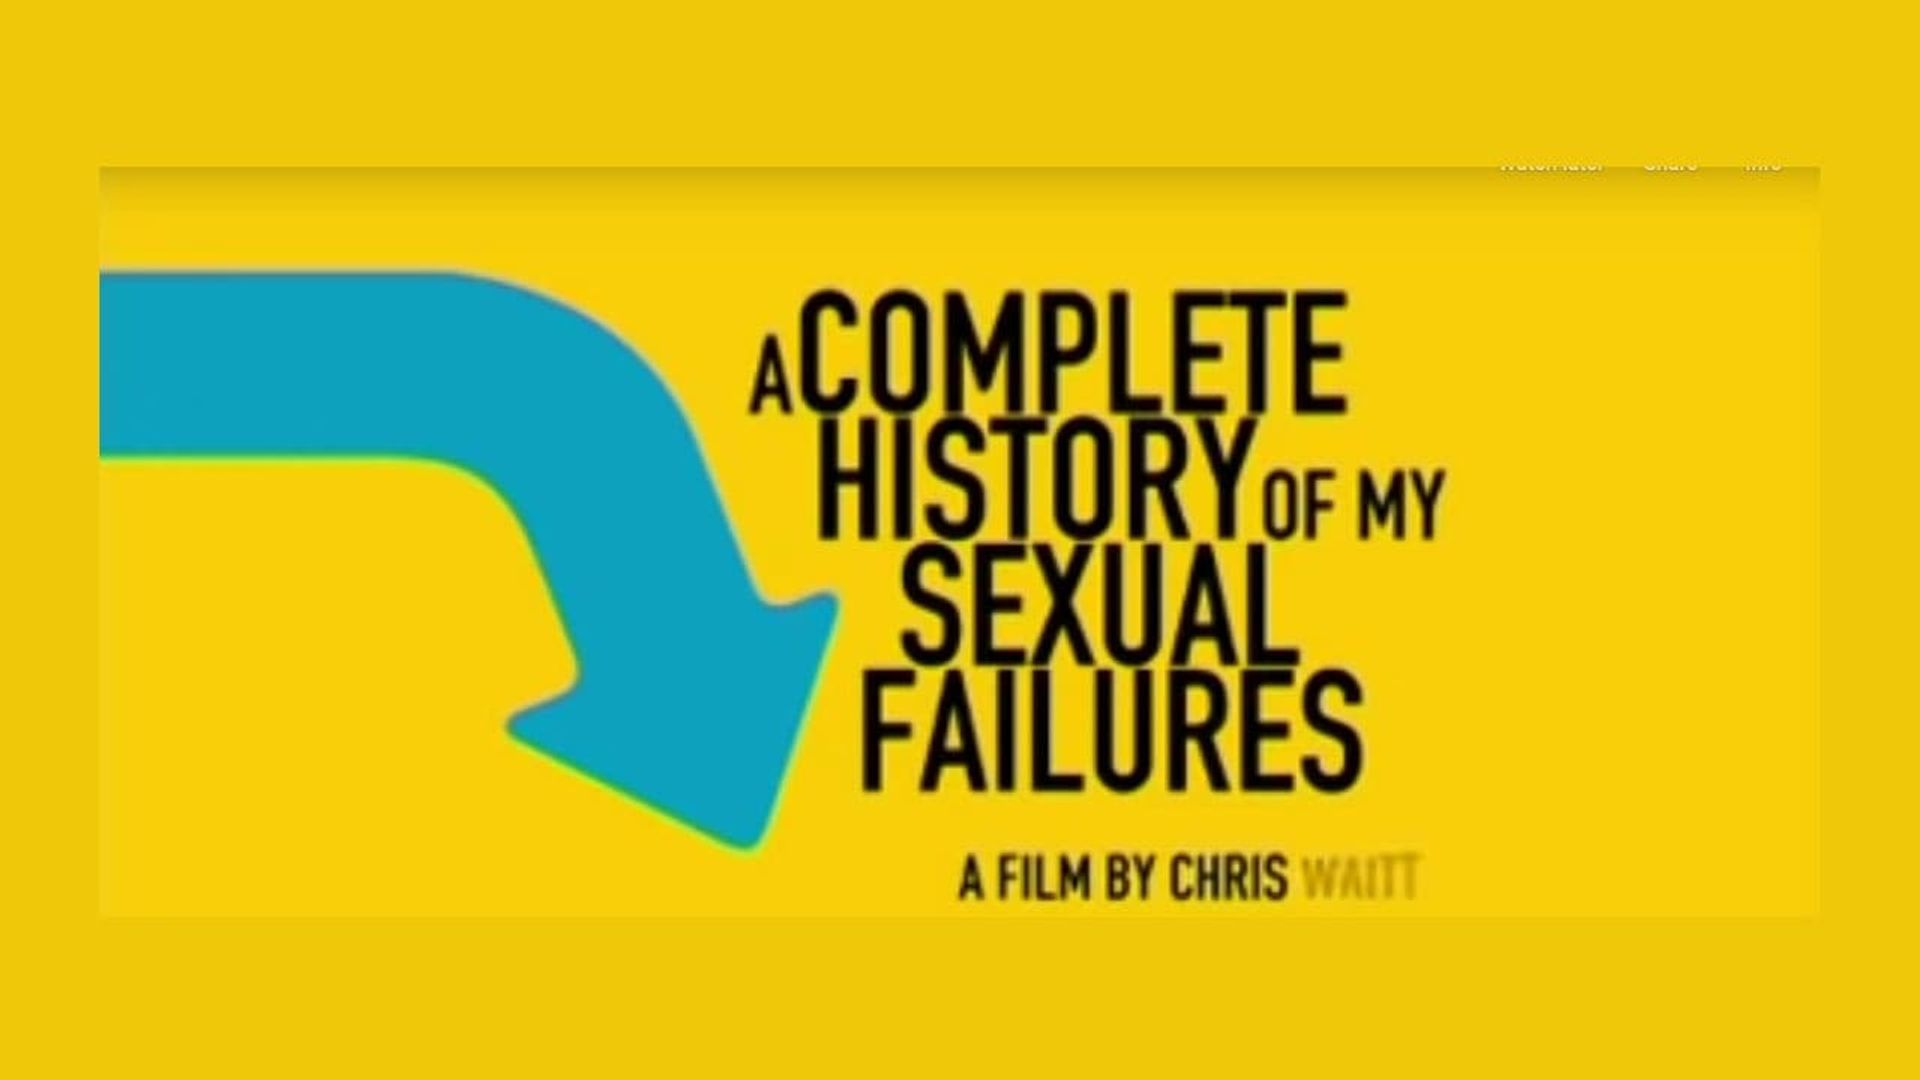 A Complete History of My Sexual Failures background